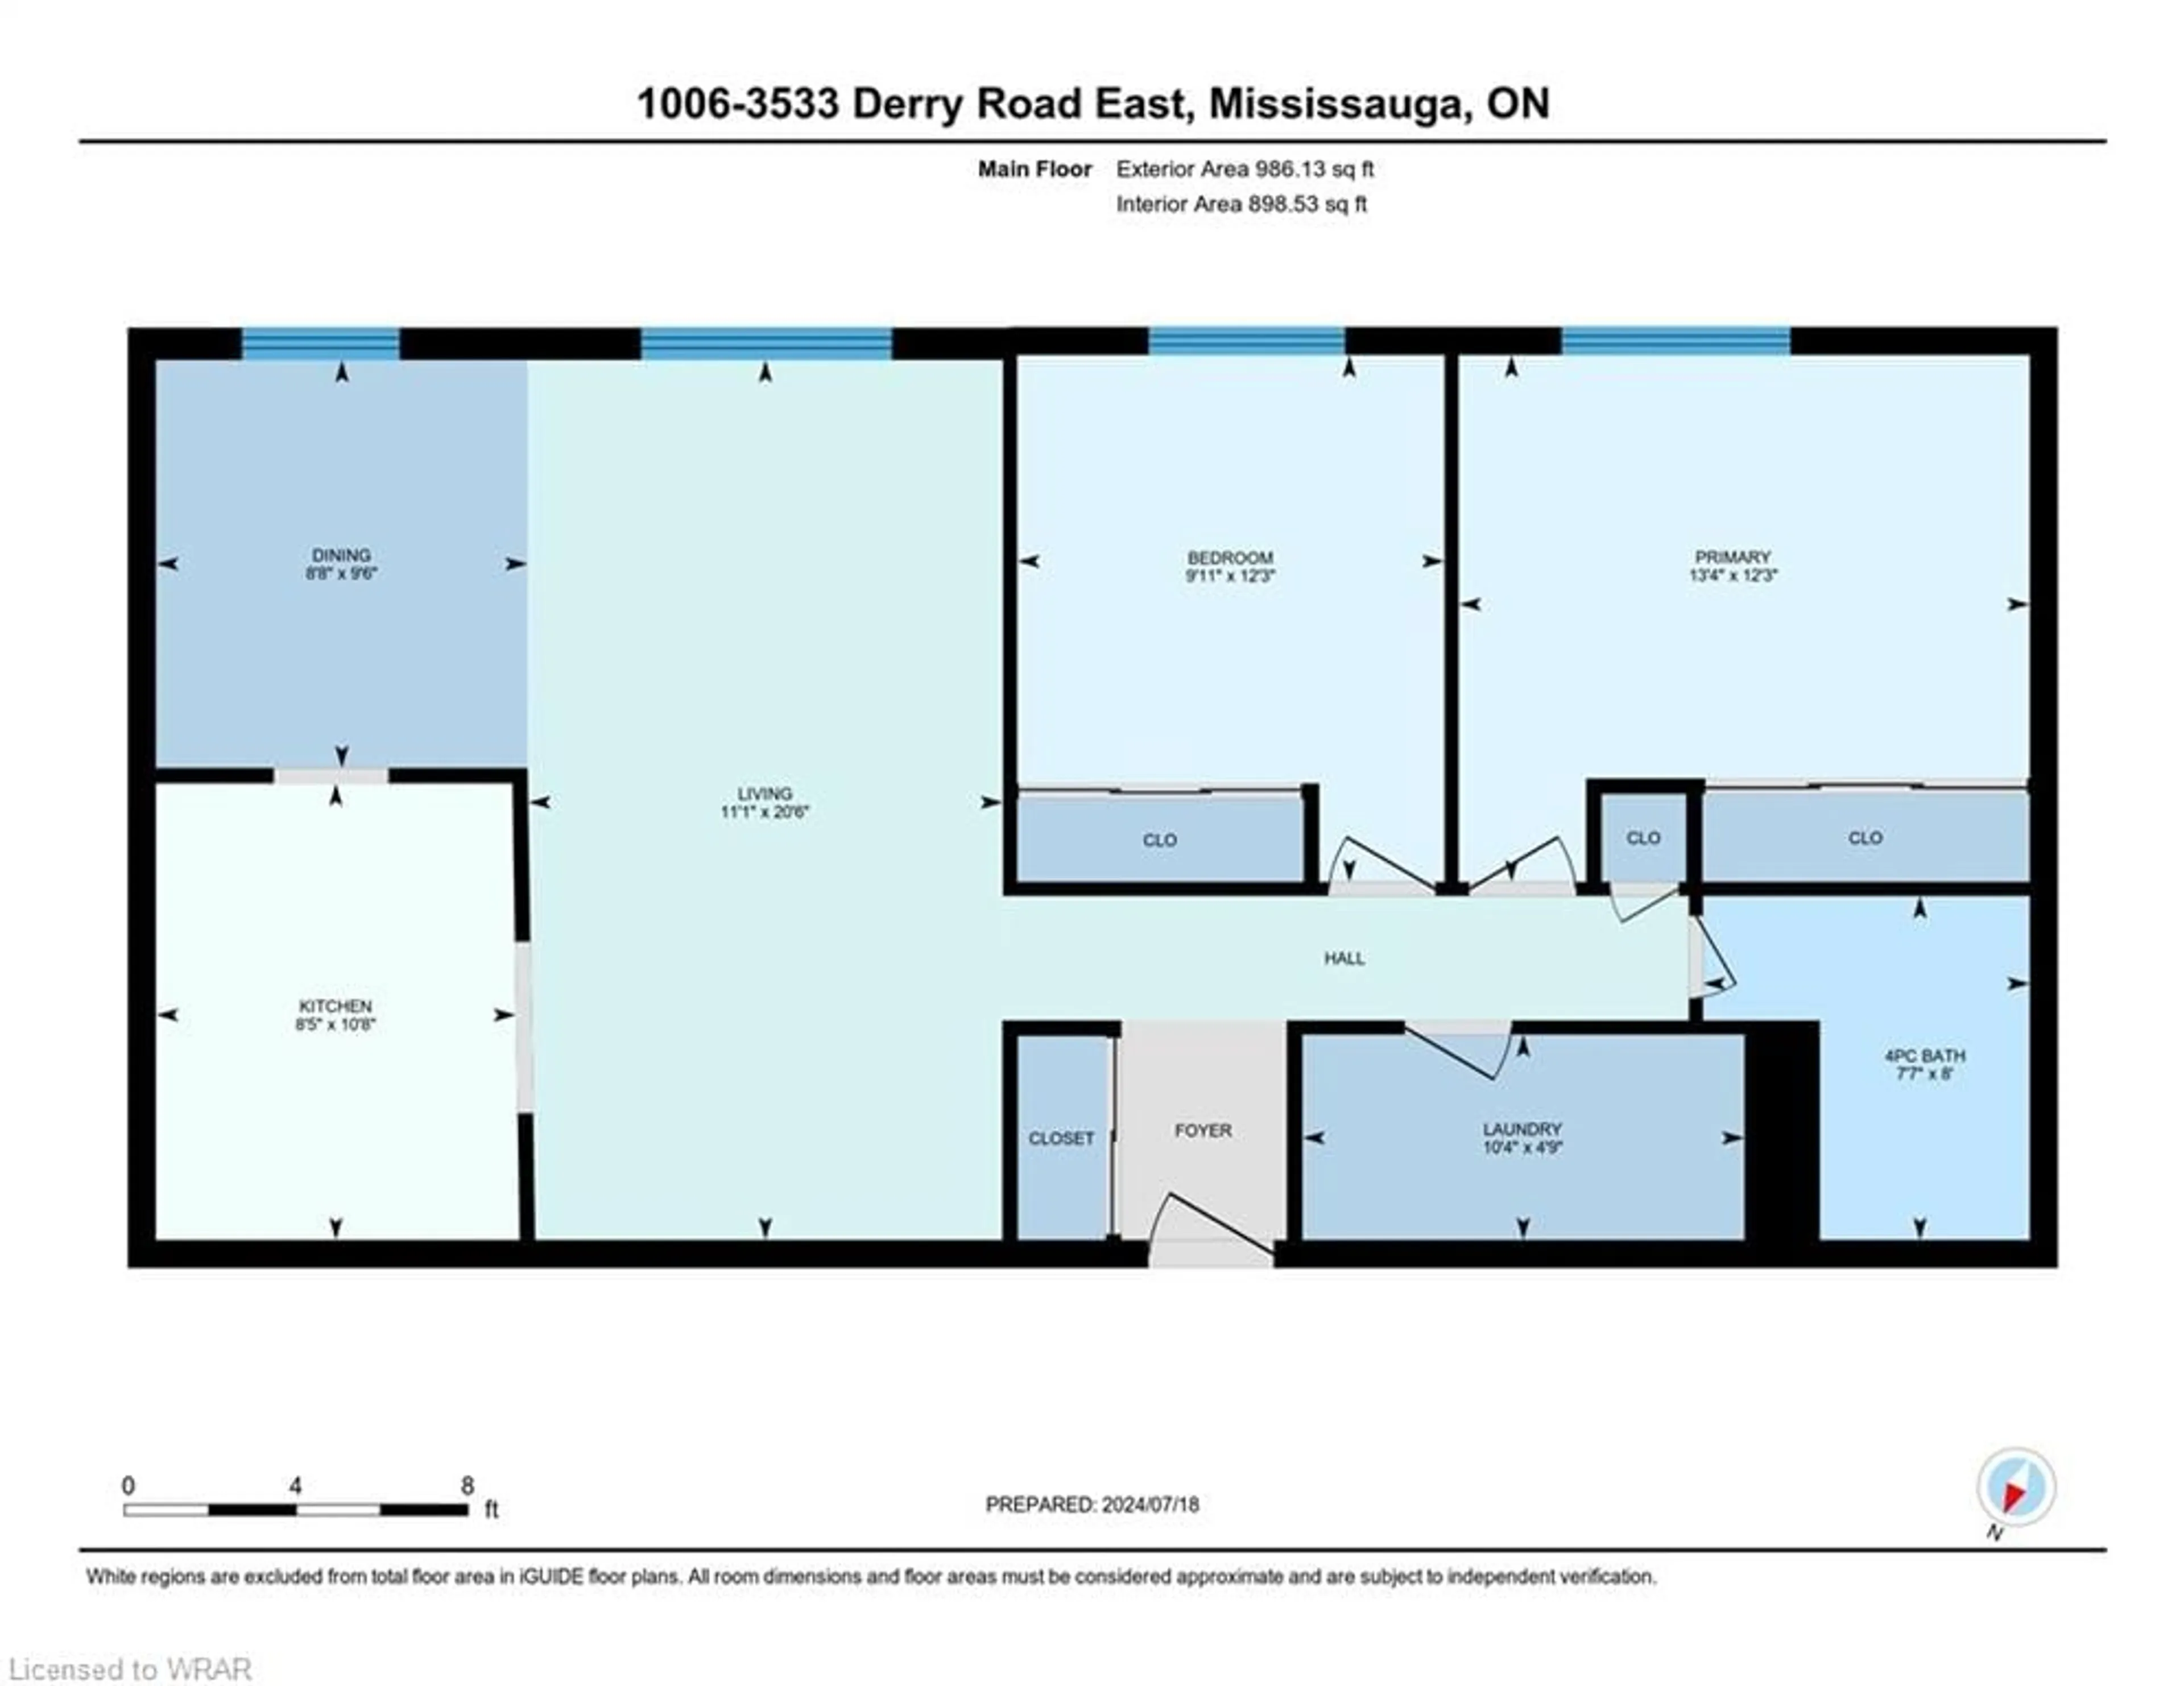 Floor plan for 3533 Derry Rd #1006, Mississauga Ontario L4T 1B1